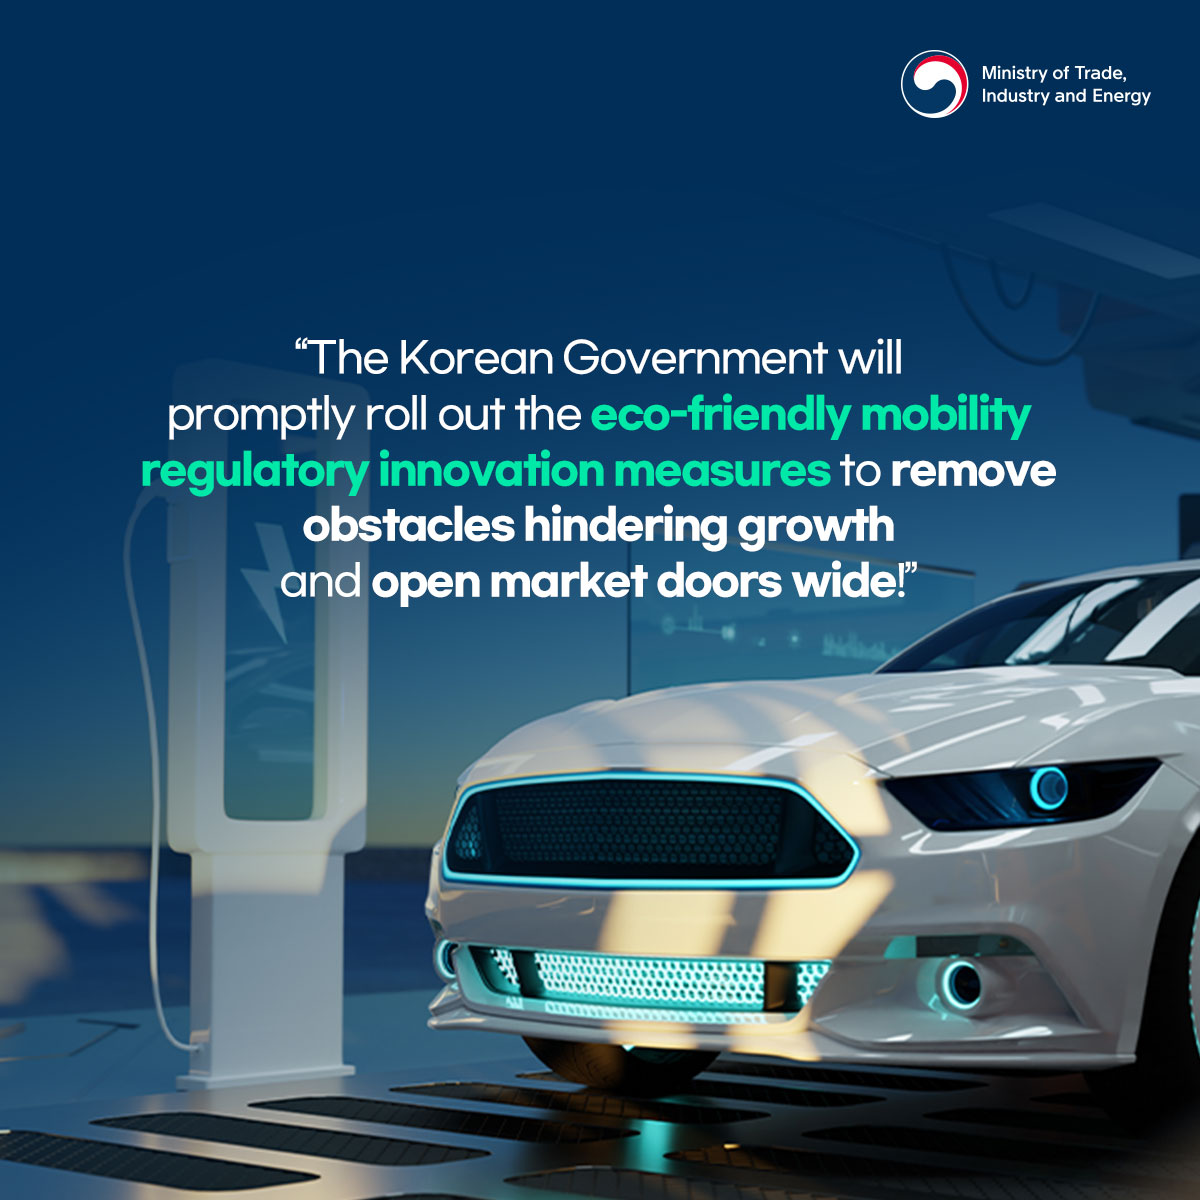 Ministry of Trade, Industry and Energy
"The Korean Government will promptly roll out the eco-friendly mobility regulatory innovation measures to remove obstacles hindering growth and open market doors wide!"